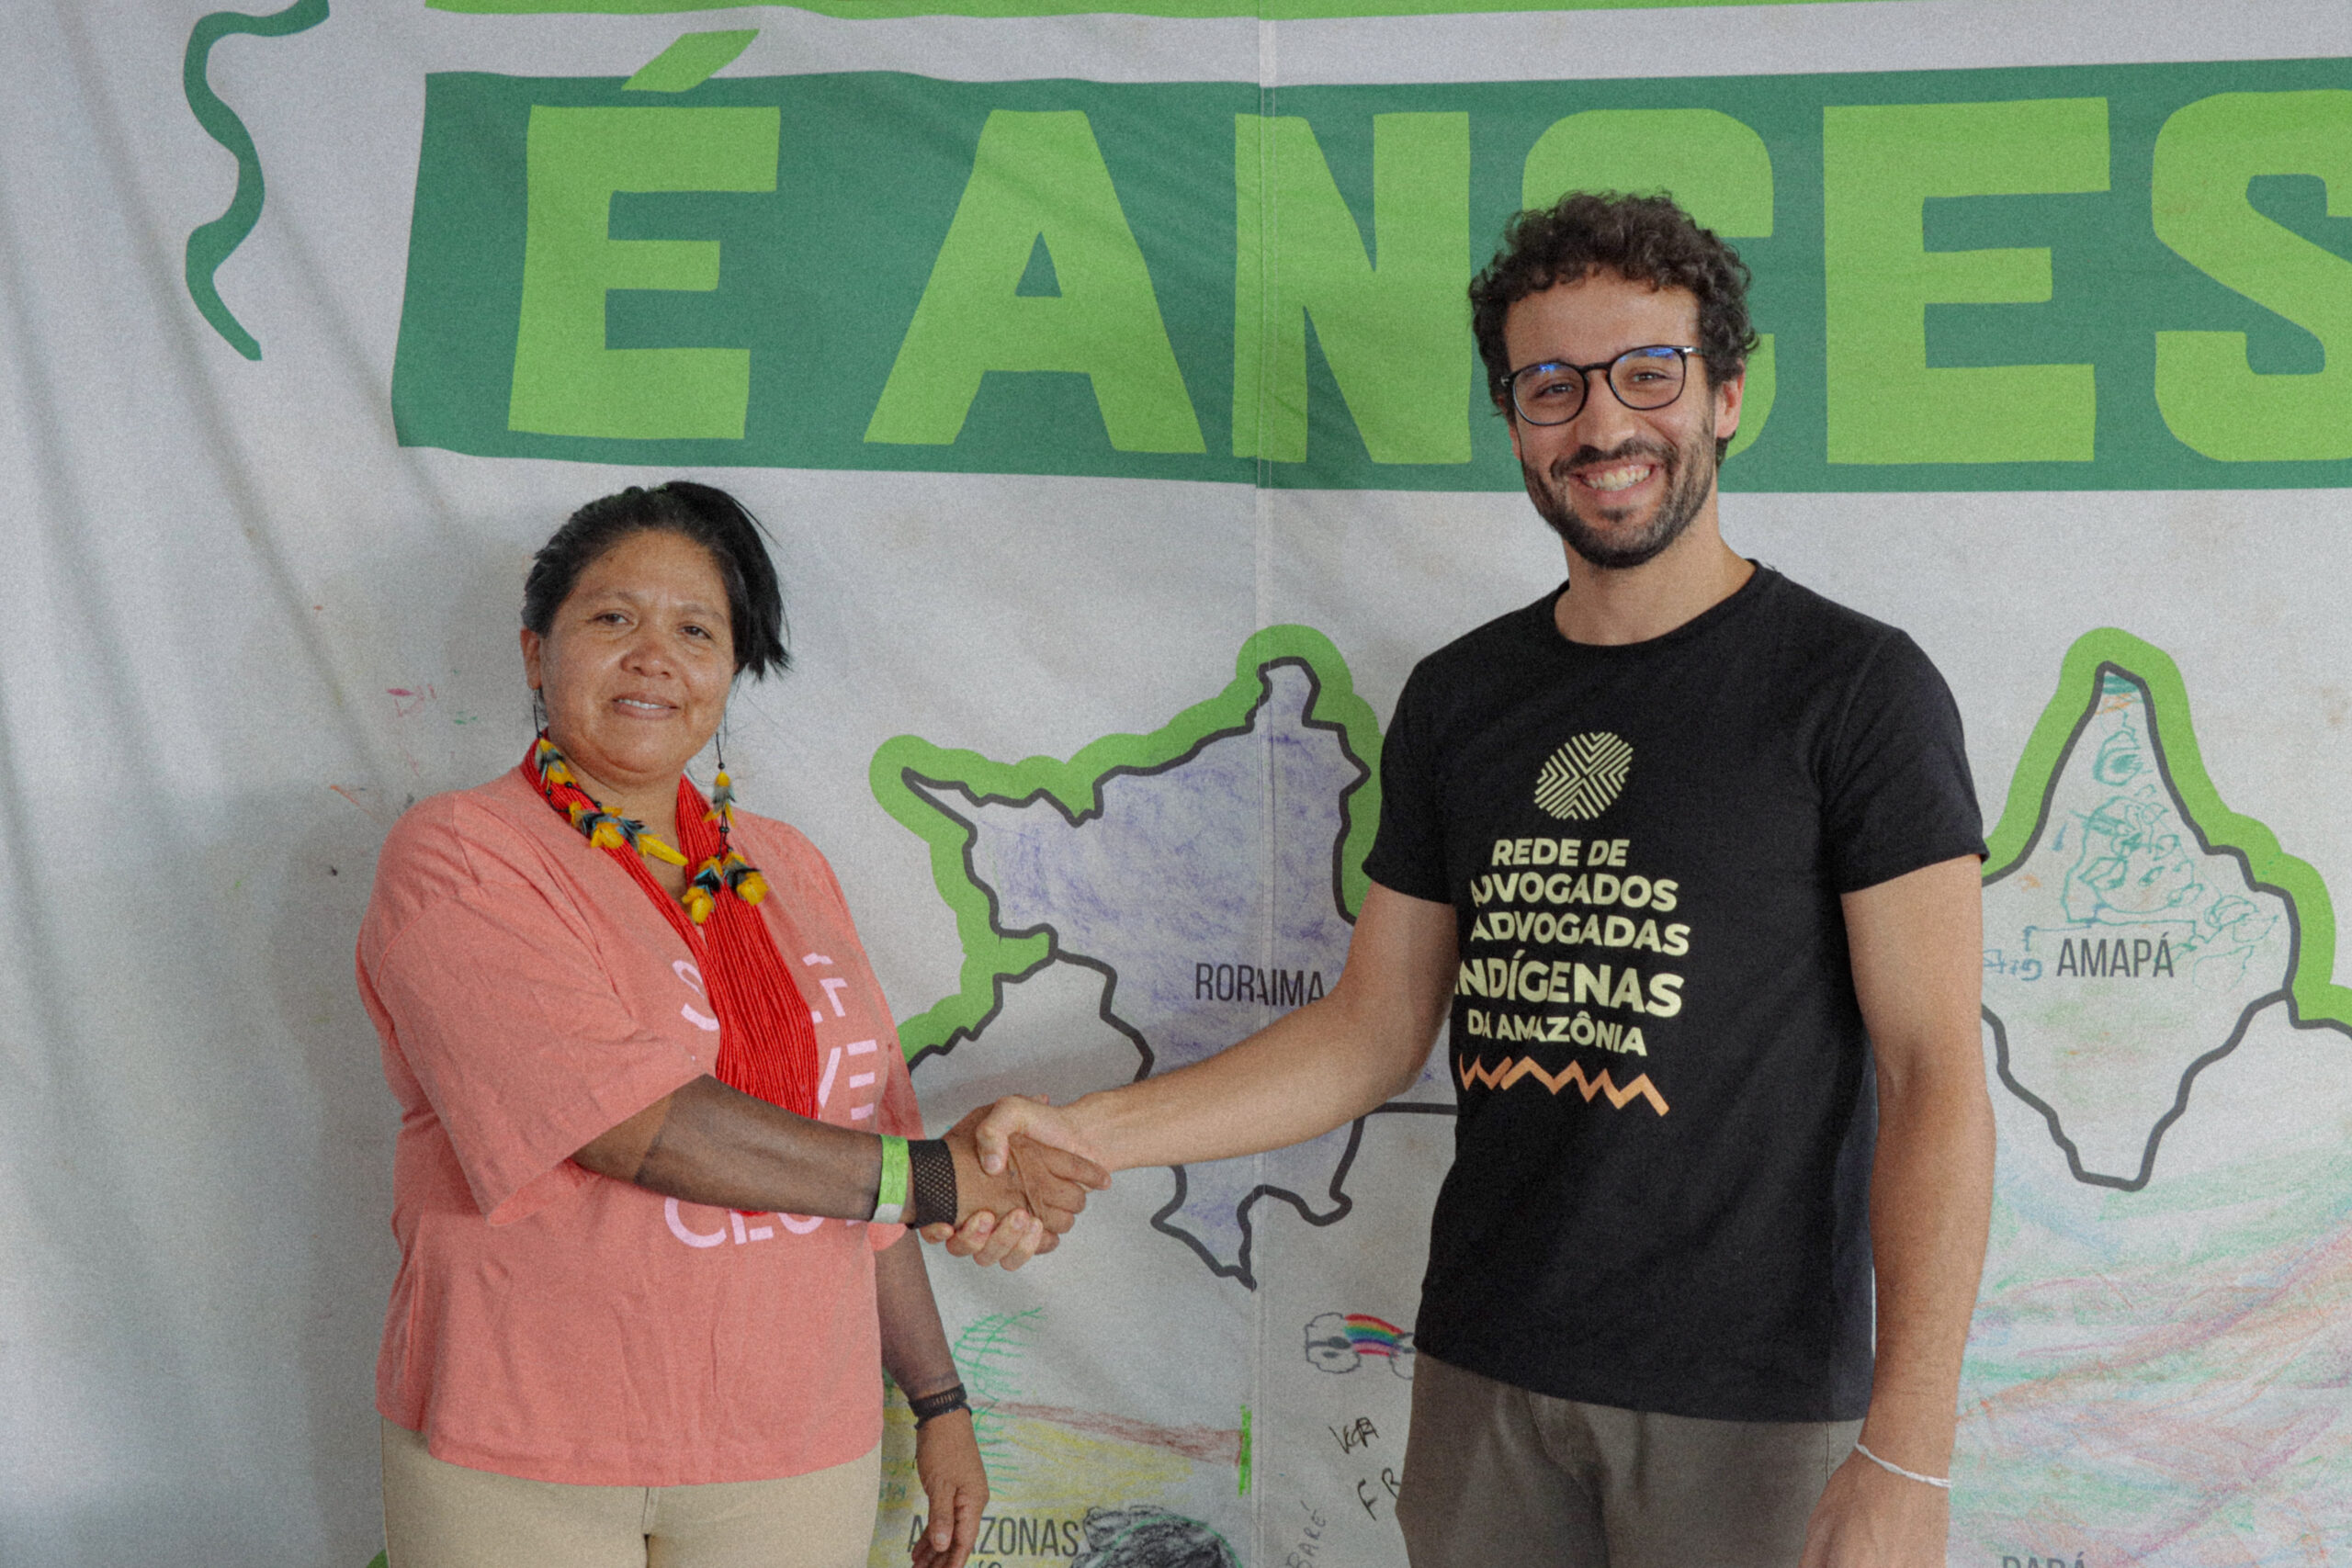 AmazoniAlerta and Coapima sign cooperation agreement to defend the rights of indigenous peoples in Maranhão